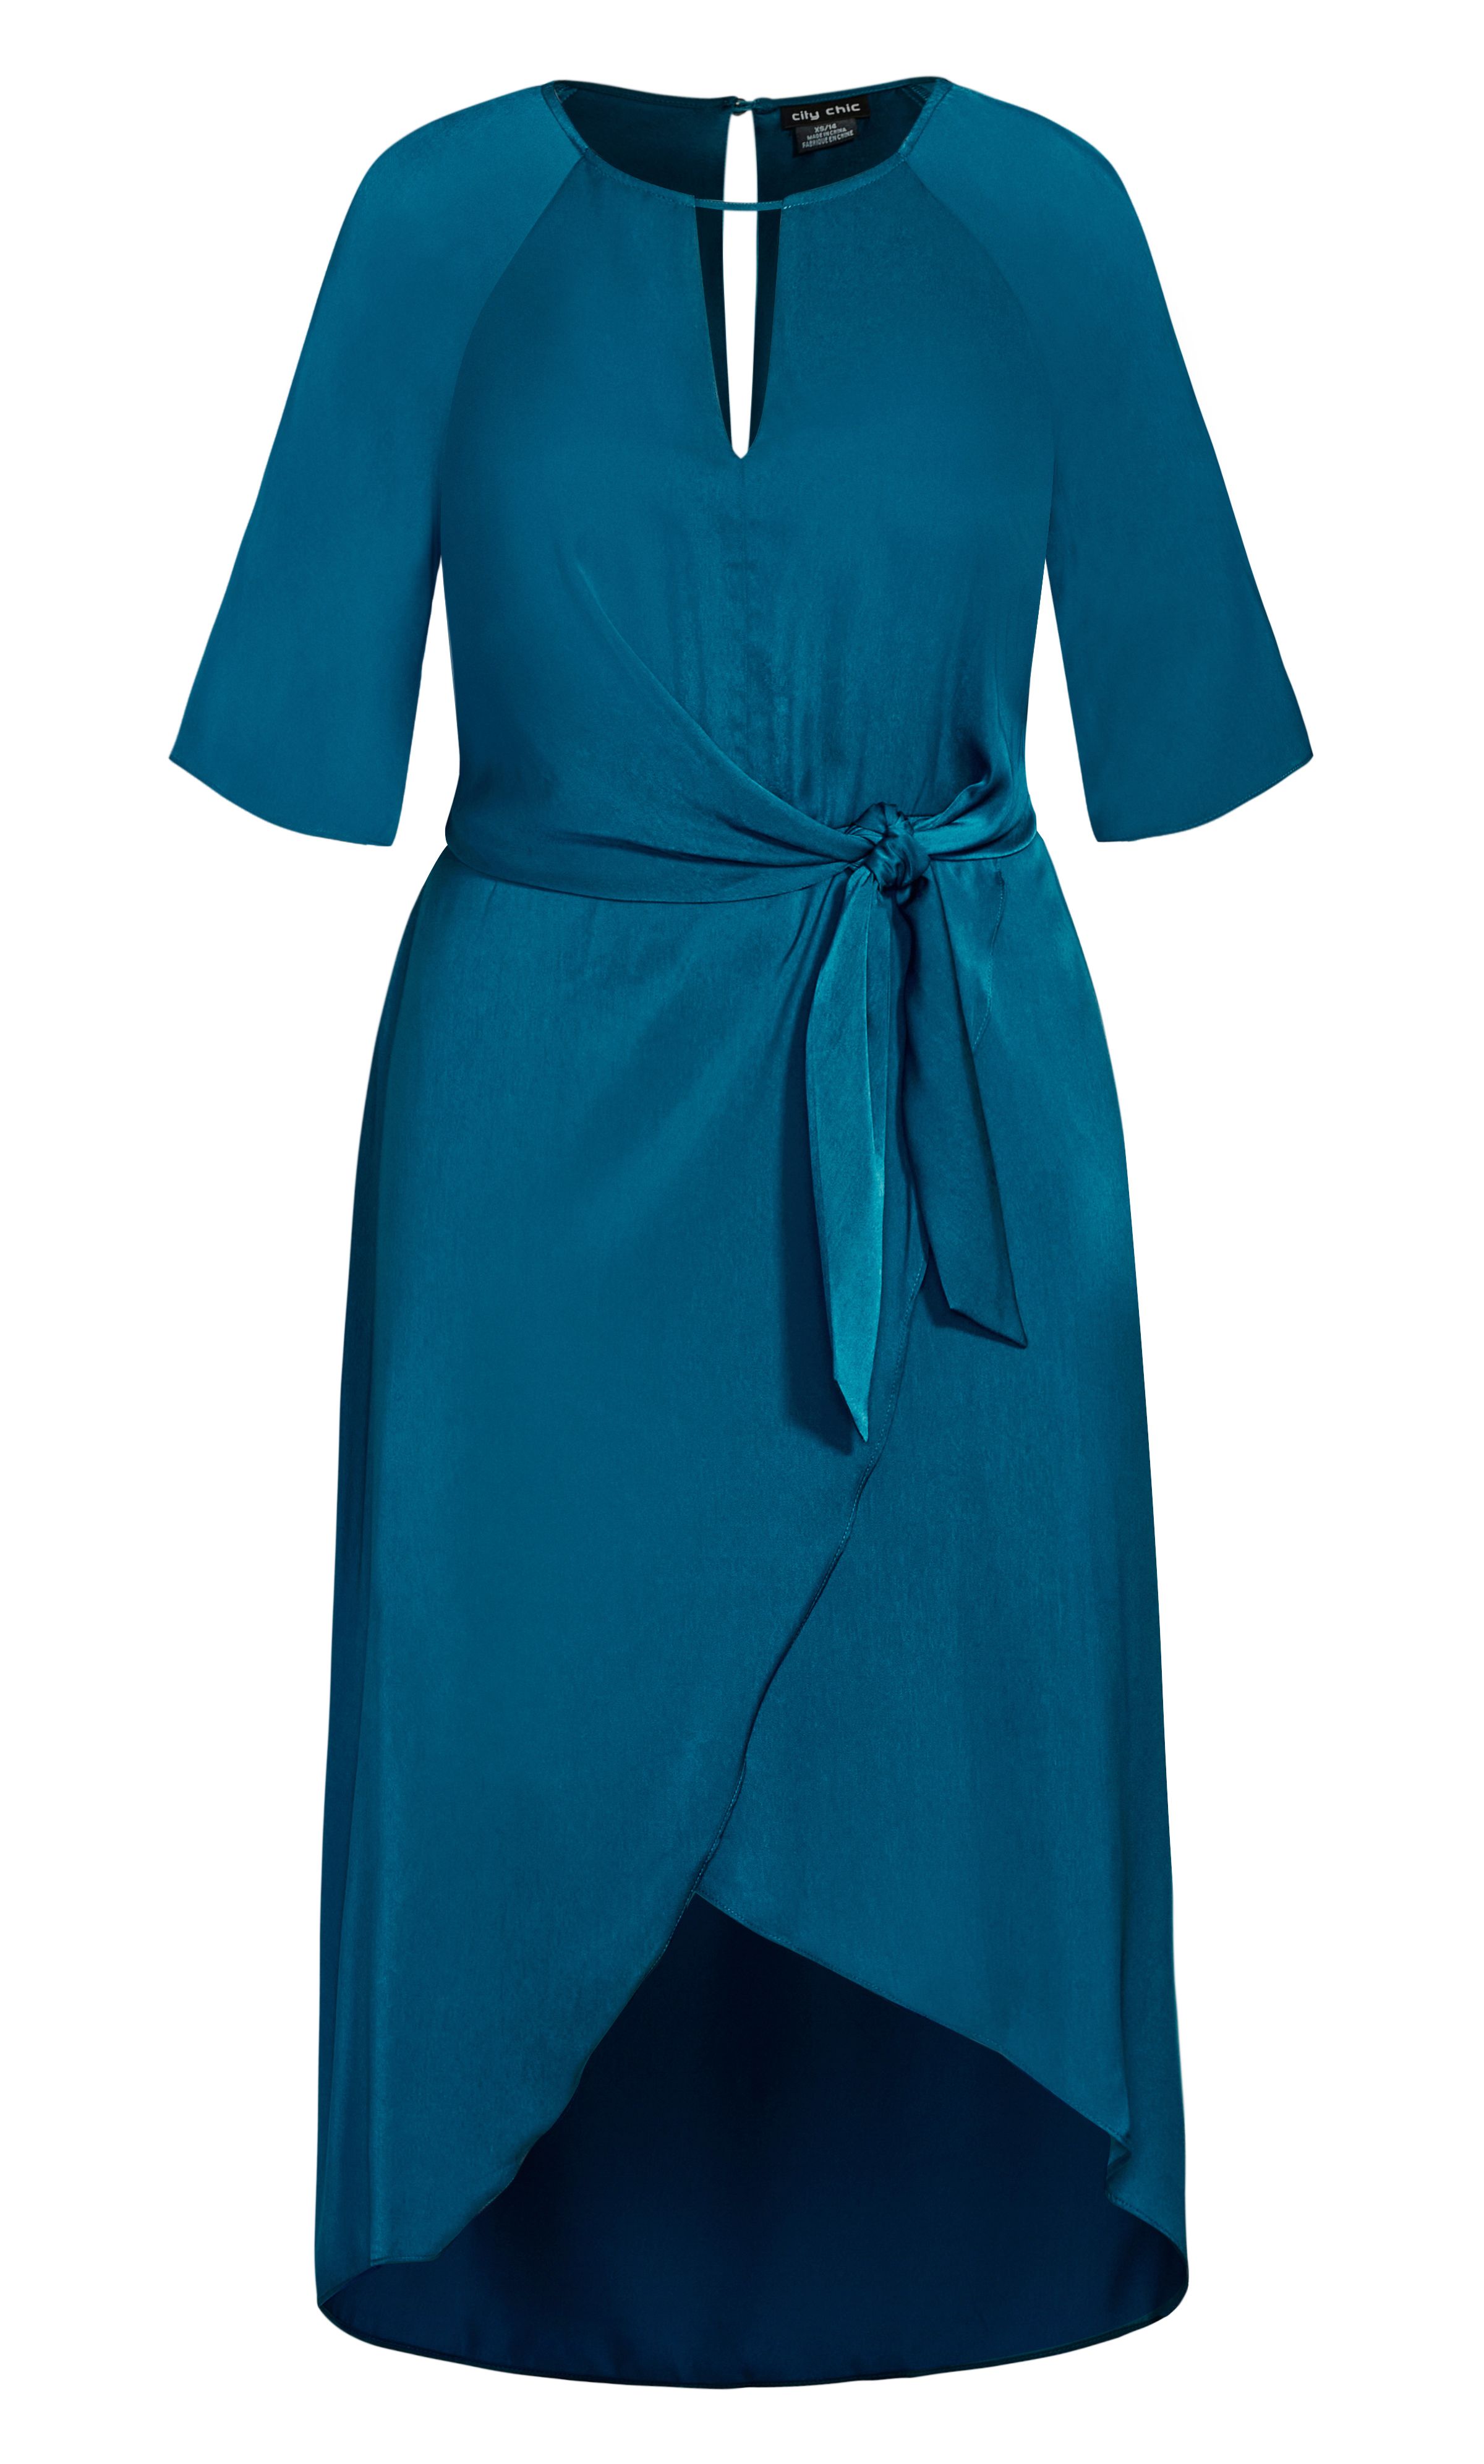 Ultra-cool and on-trend, the Sleek Tie Dress is effused with casual elegance. Featuring a notched V-neckline, this dress includes a wrap-style midi-length hemline with a knot detail to the front. Sweeping elbow sleeves offer a delicate touch to a bold and sophisticated look. Key Features Include: - Notched V-neckline - Short flutter sleeves - Adjustable self-tying waist - Faux wrap-style skirt - Lush stretch fabrication - Gold button closure to nape of neck with keyhole cut-out - Pull-over silhouette - Lined Team this dress with a strappy pair of heels for a decadent night out.